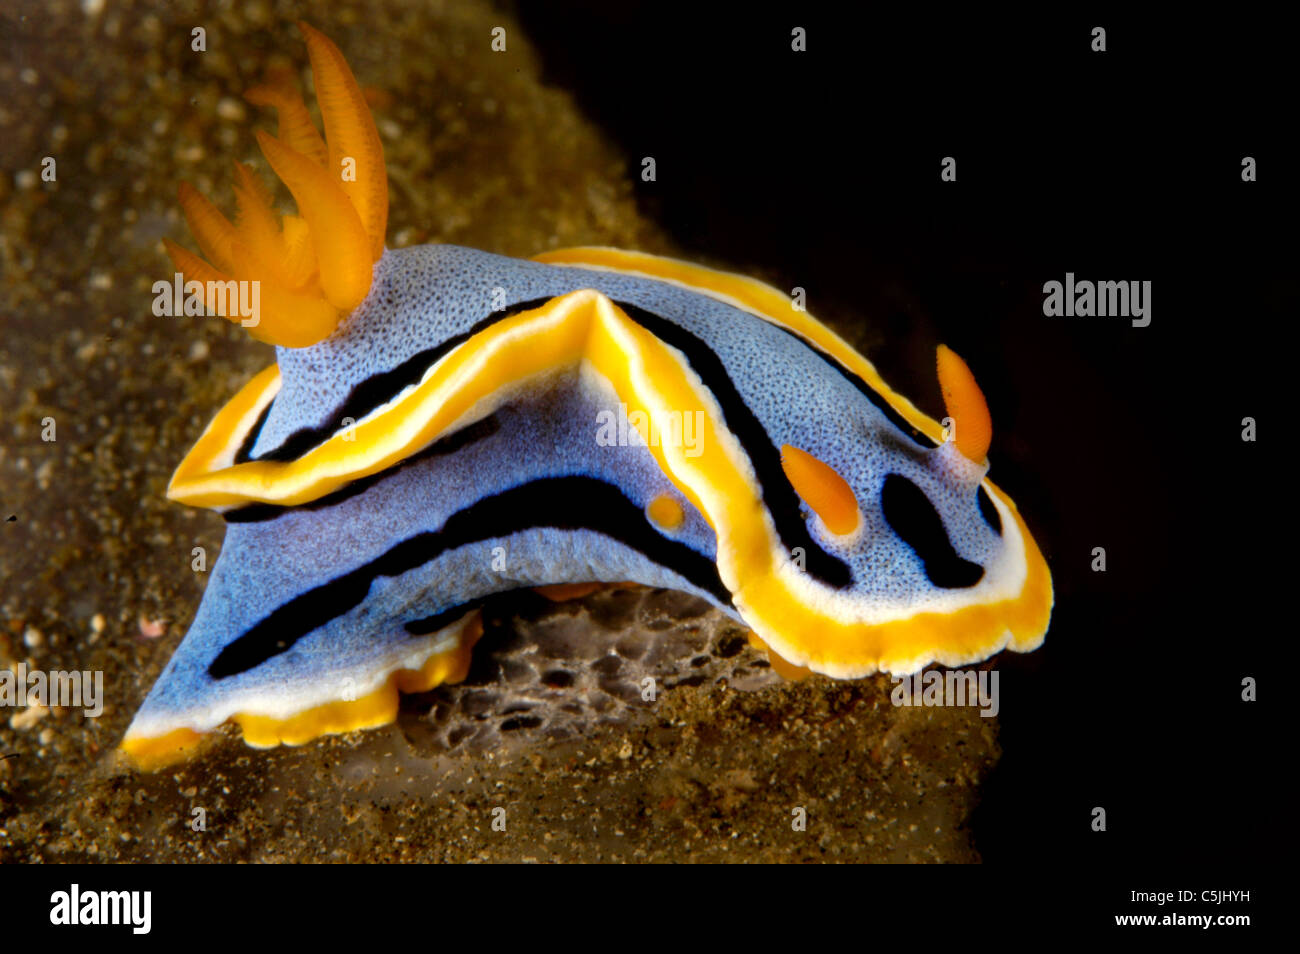 A marine snail known as a nudibranch crawls across a reef. Stock Photo